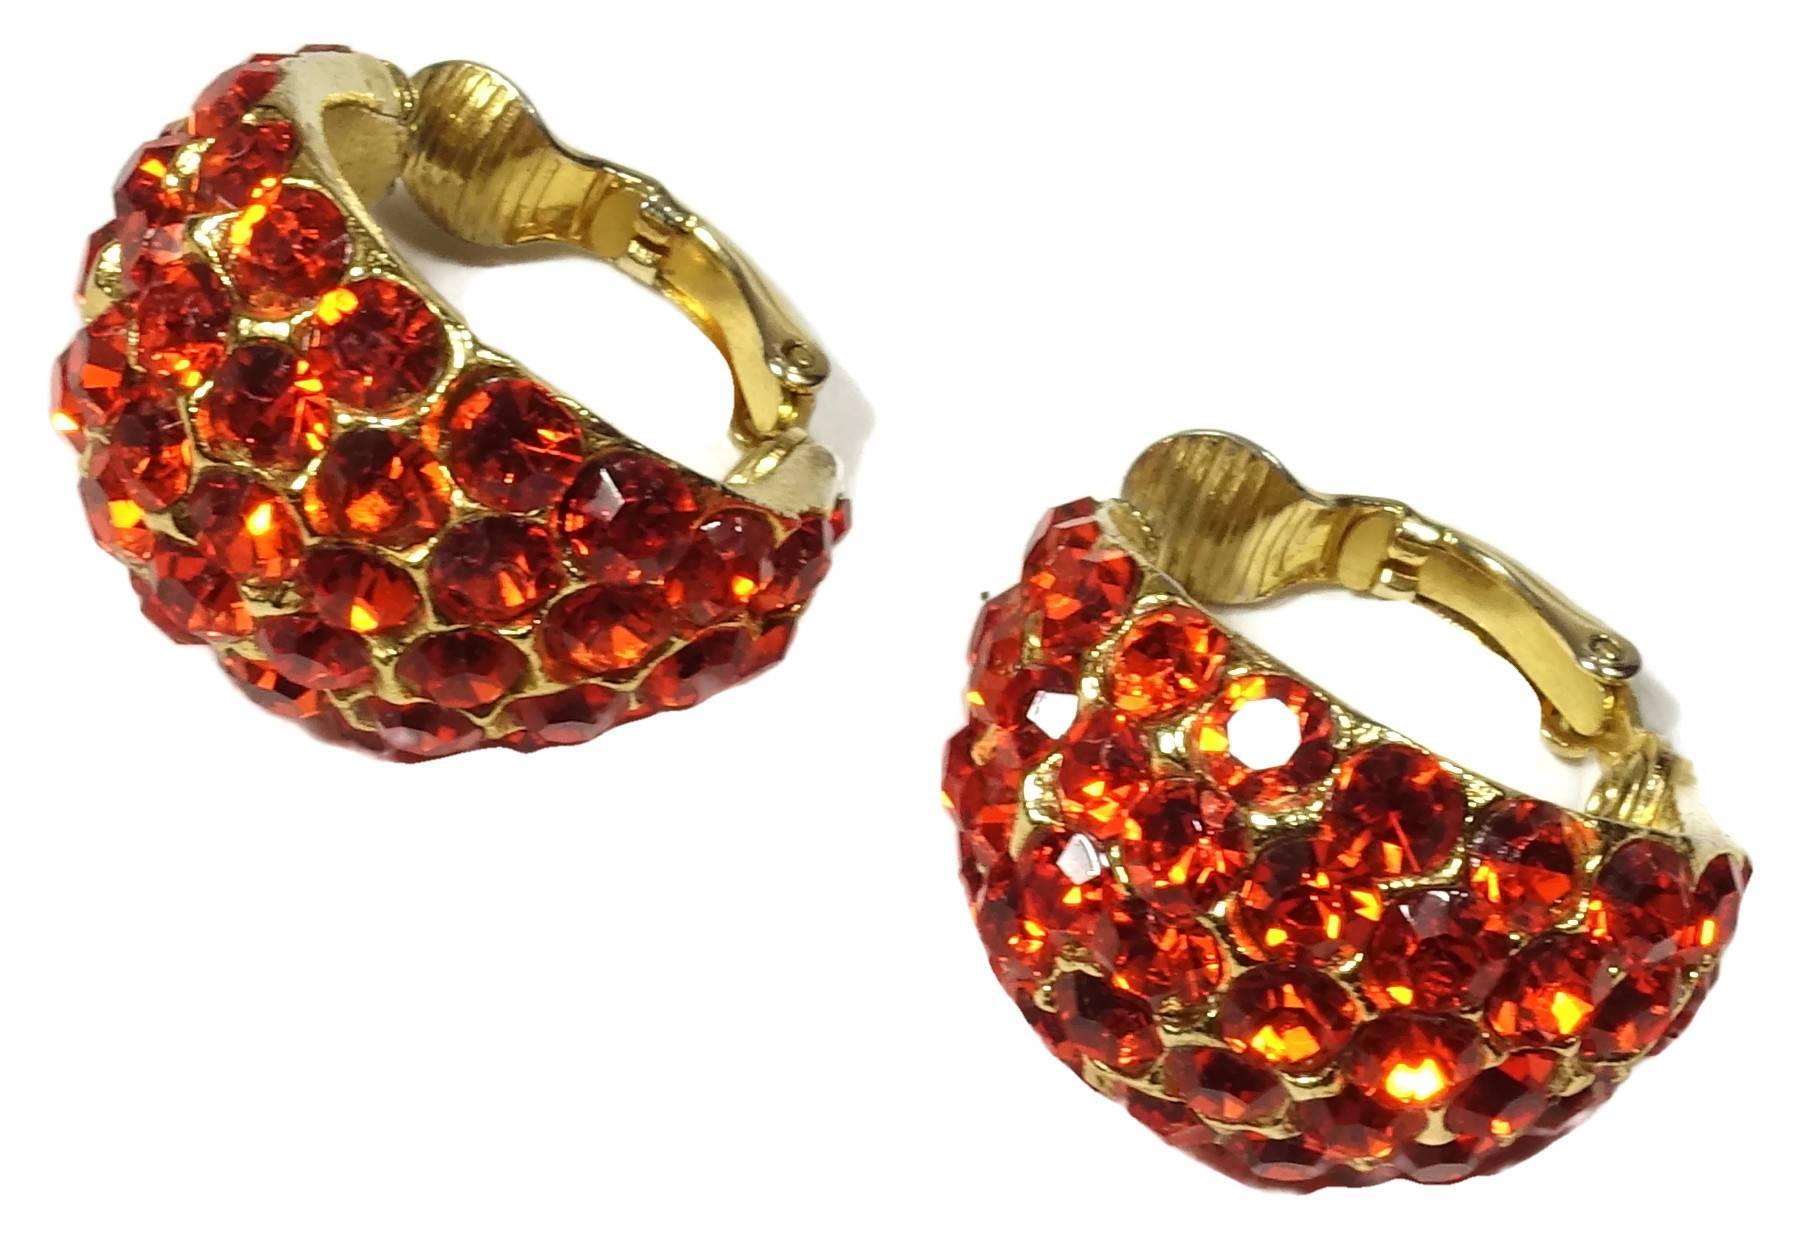 These sparkling clip earrings have a hoop design encrusted with brilliant orange rhinestone.  They are in a gold tone base metal finish and measure 2” around and 7/8” at its widest point.  These earrings are in excellent condition.